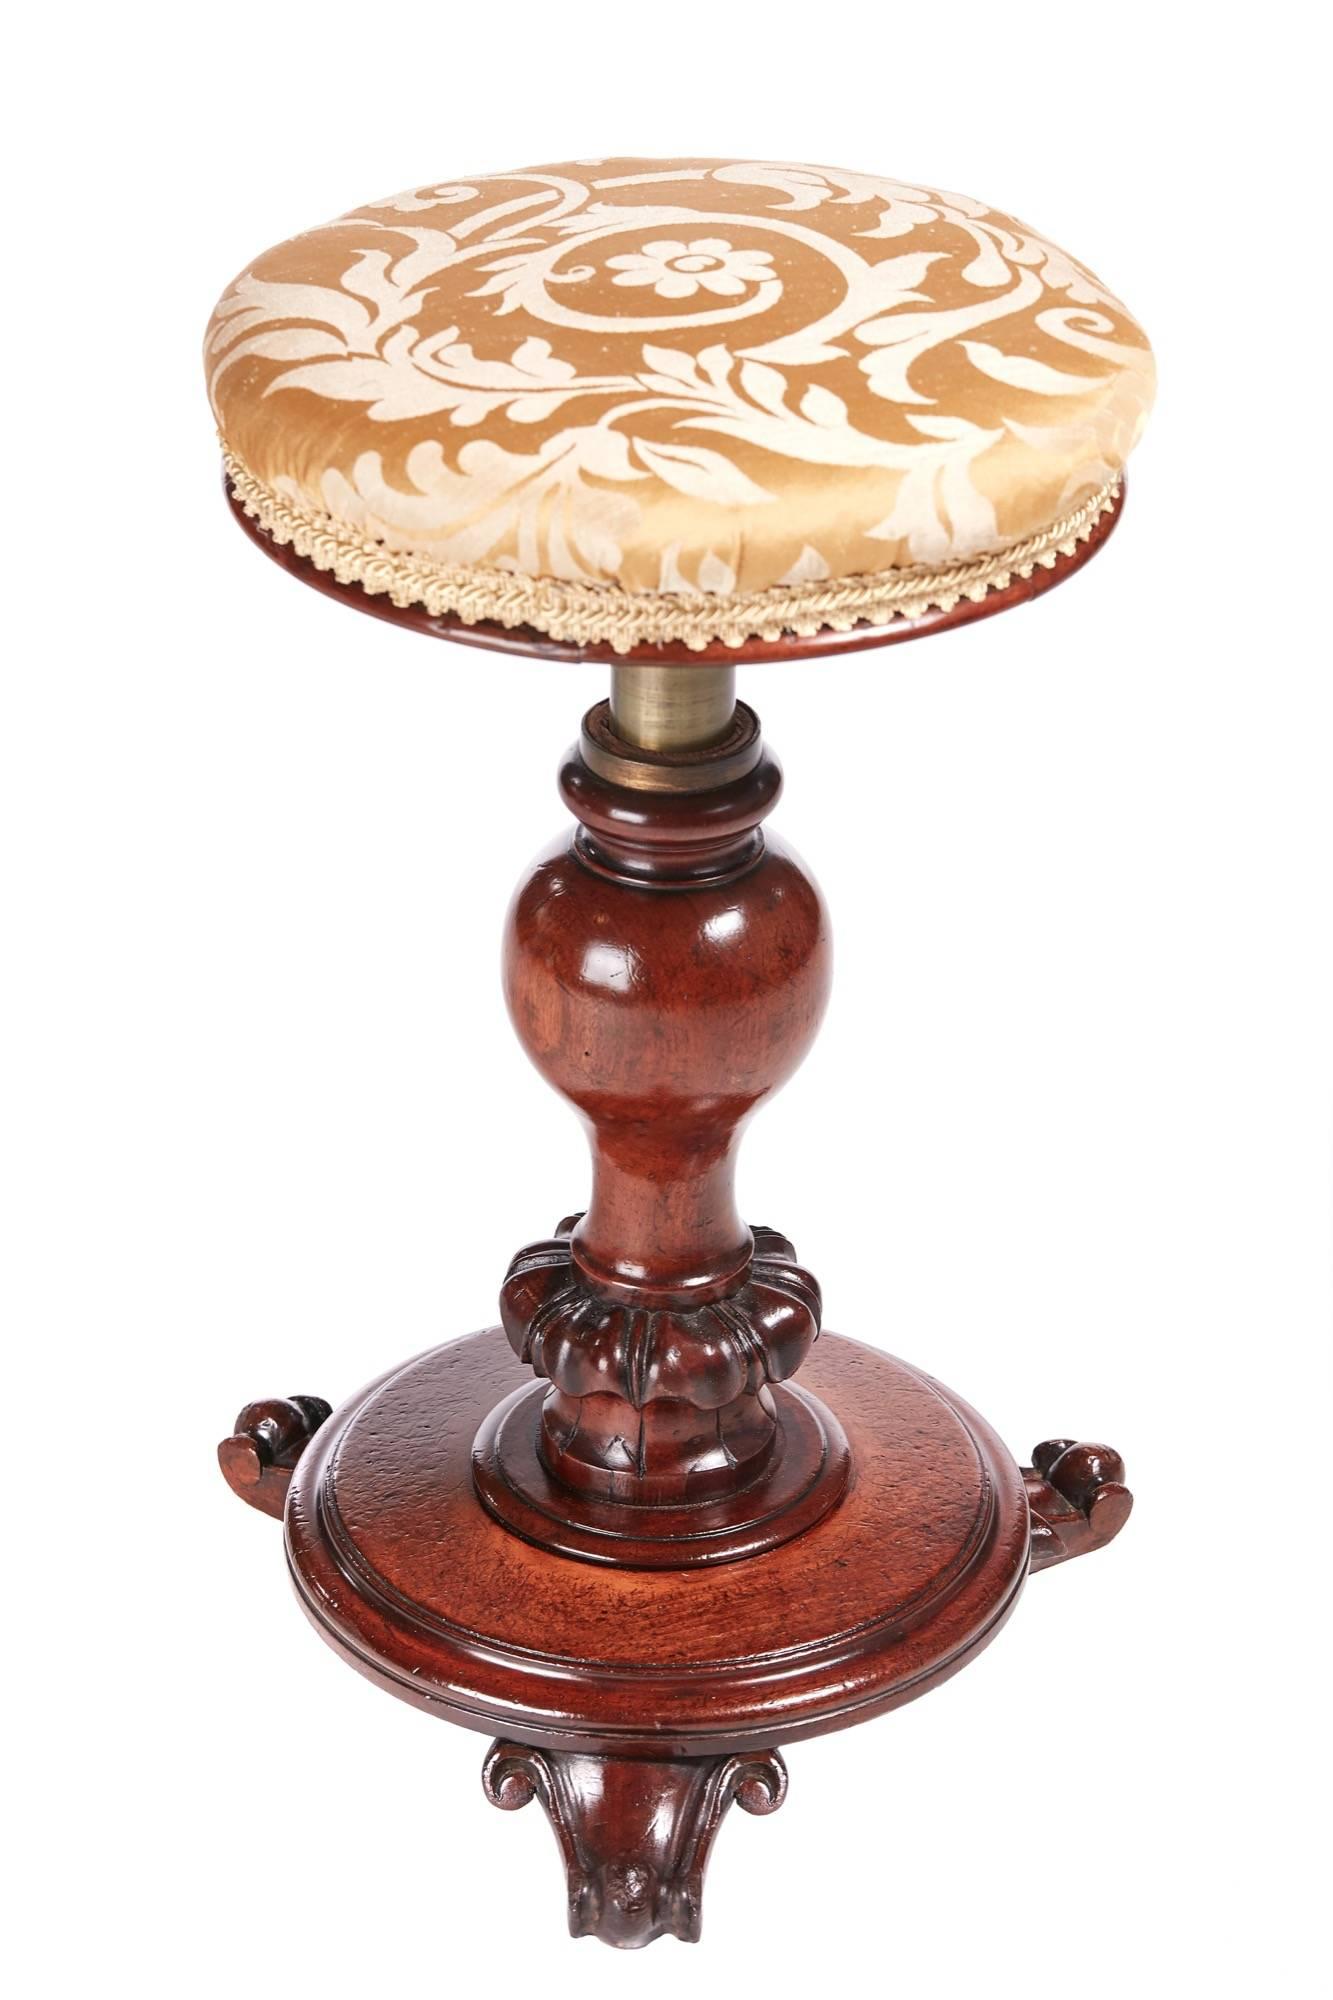 Quality Victorian mahogany revolving music stool, with a lovely carved shaped column on a round base with three shaped carved feet ,all in solid mahogany
Lovely color and condition
Measures: 12